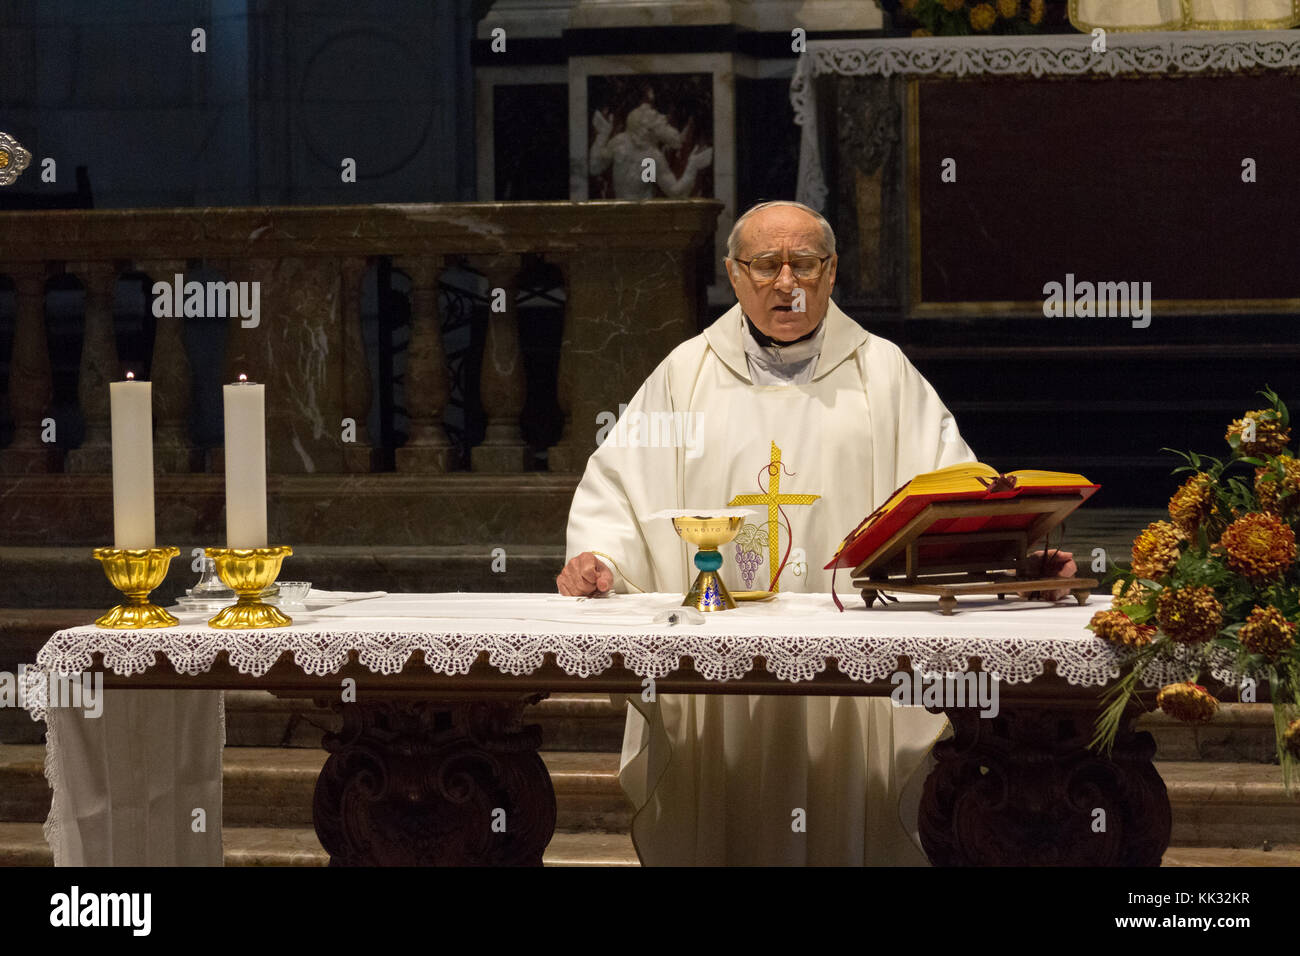 Pavia, Italy. November 11 2017. A priest celebrating a holy mass in Duomo di Pavia (Pavia Cathedral). He is praying over the bread and wine on the alt Stock Photo